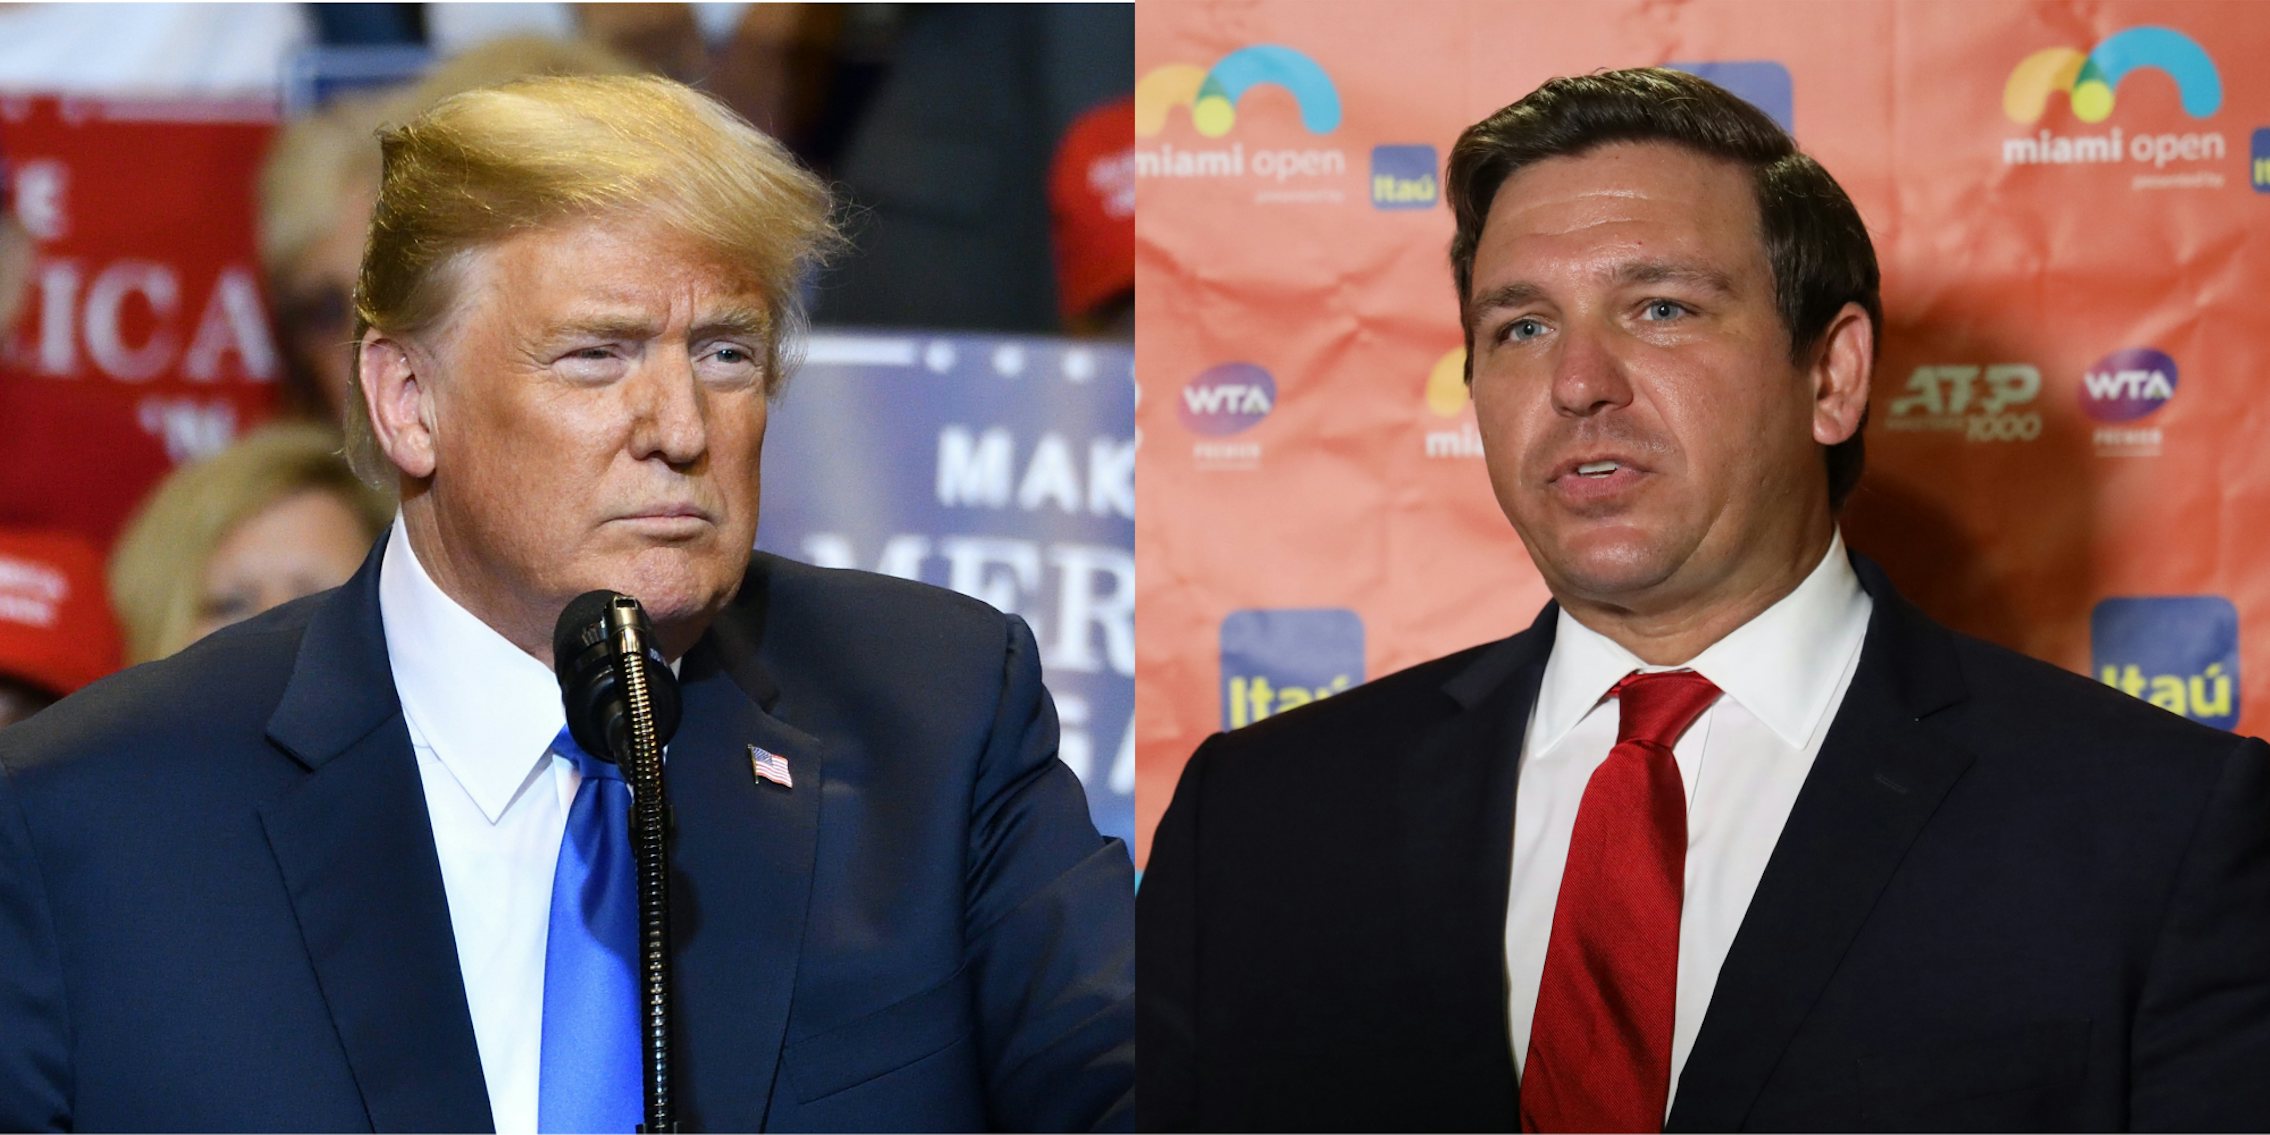 Donald Trump with microphone in front of crowd holding signs (l) Ron DeSantis speaking in front of orange background (r)